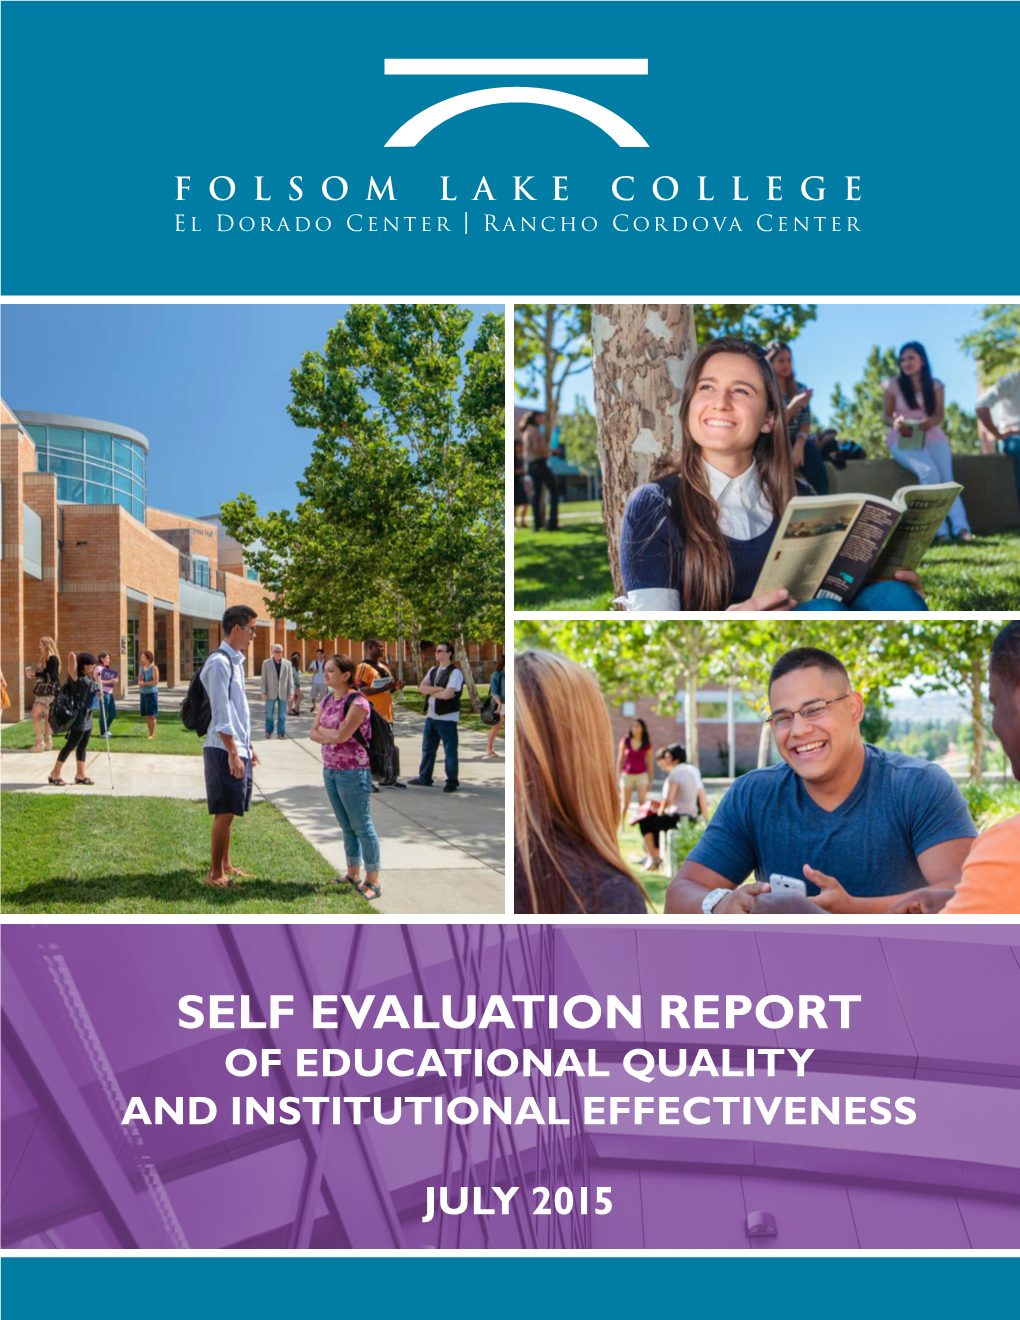 Self Evaluation Report of Educational Quality and Institutional Effectiveness